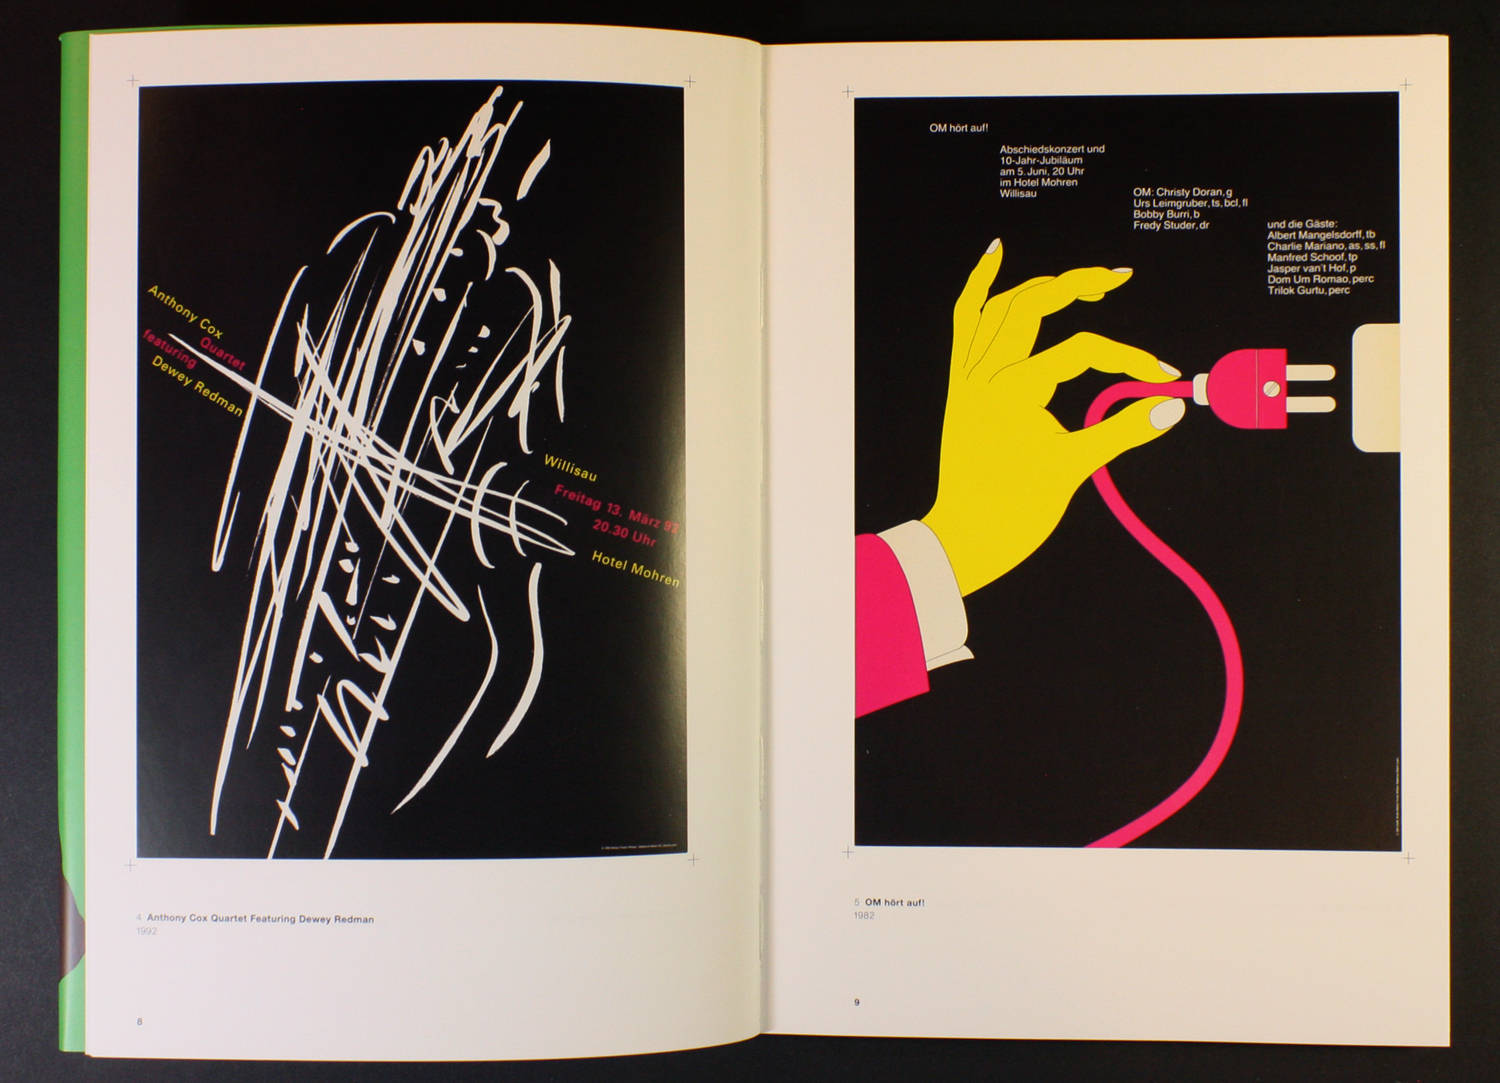 Spread picturing posters by Niklaus Troxler: Anthony Cox Quarter Featuring Dawey Redman, 1992 (left); and Om hört auf!, 1982 (right).